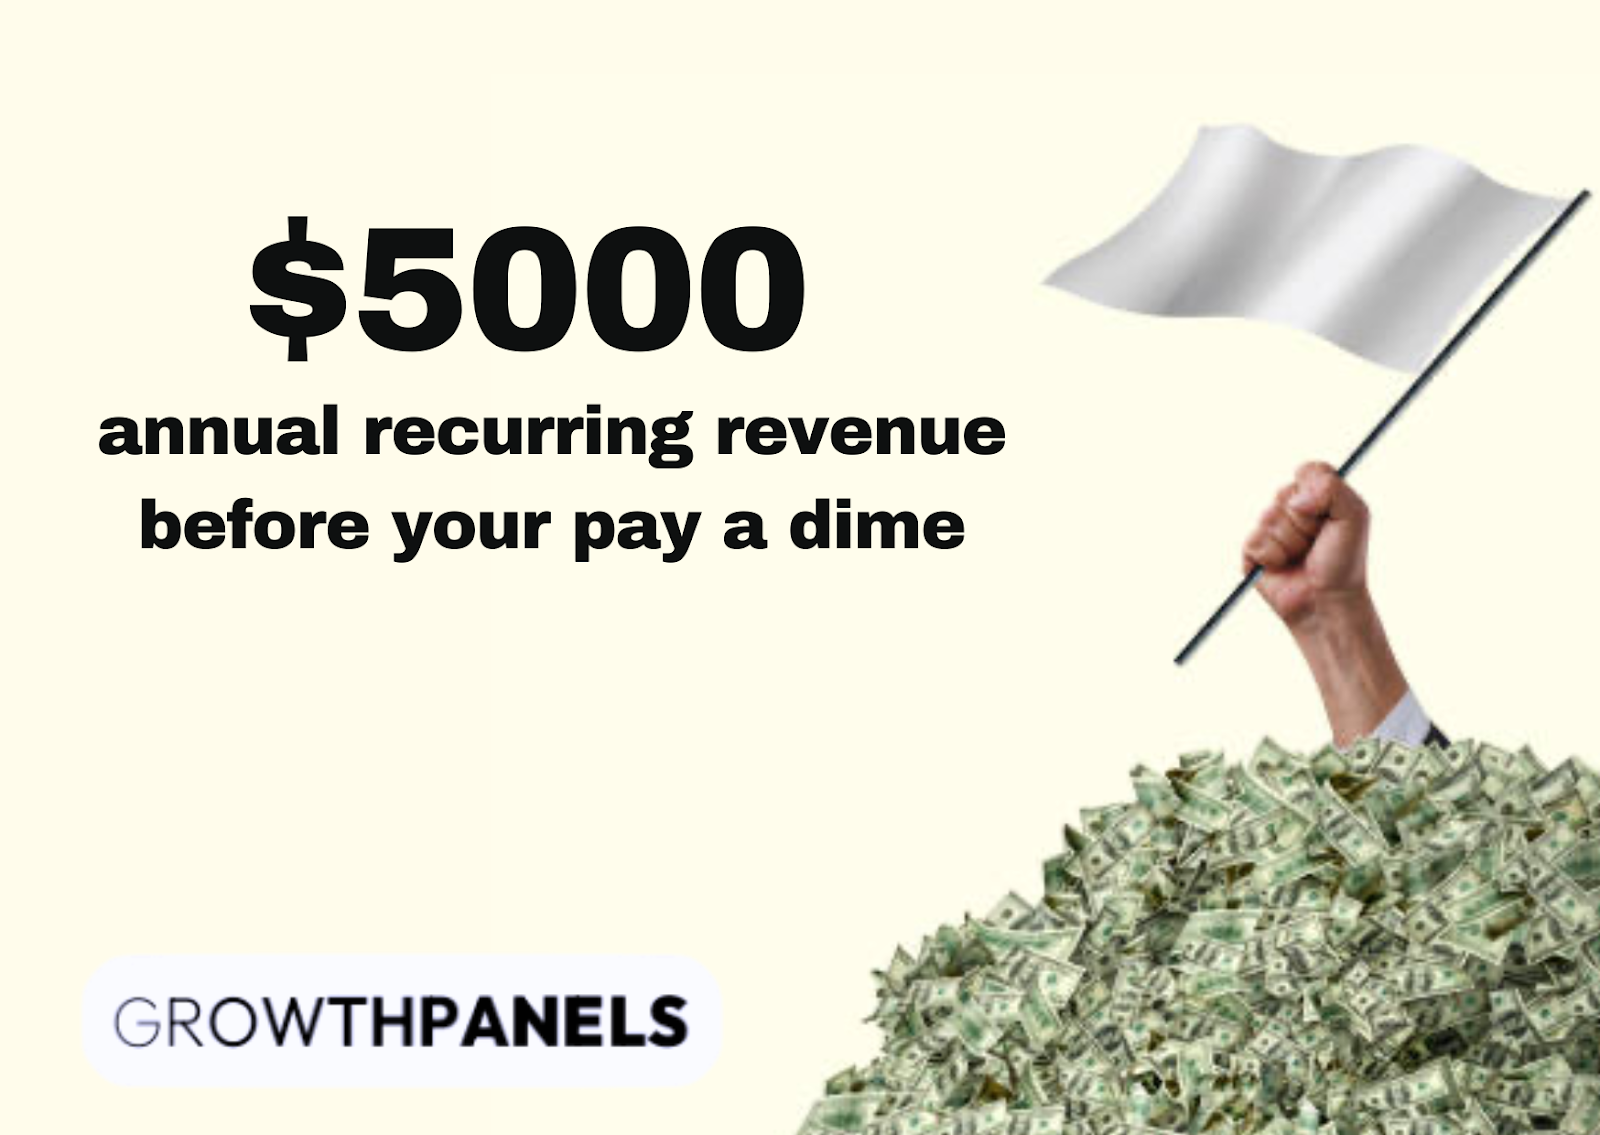 An infographic that states GrowthPanels can increase your annual recurring revenue by $5000. 